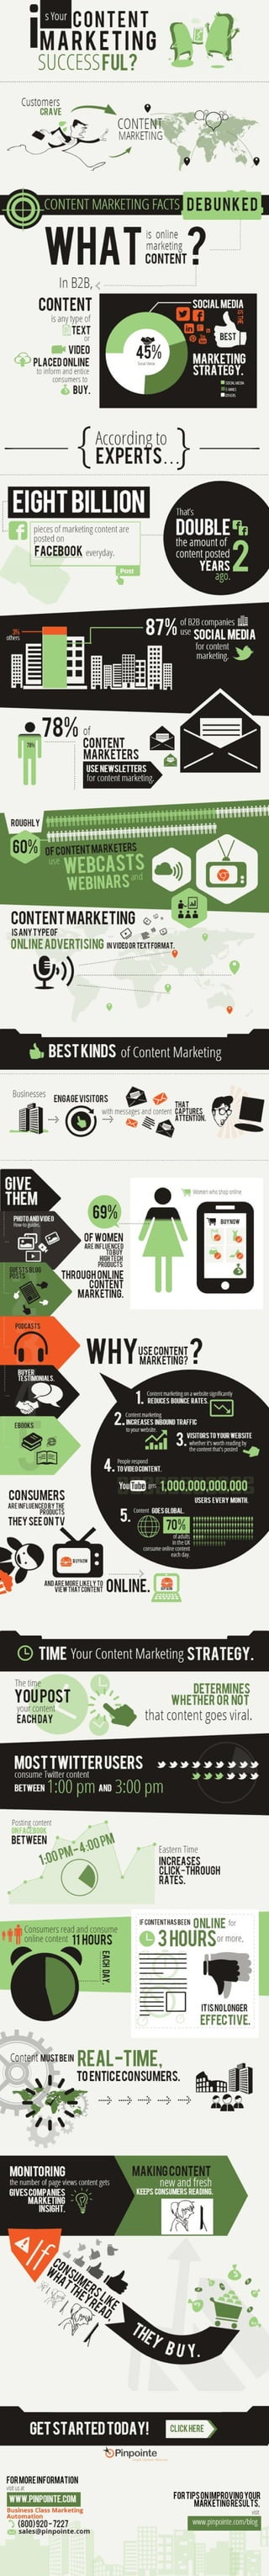 Infographic: Is Your Content Marketing Successful?